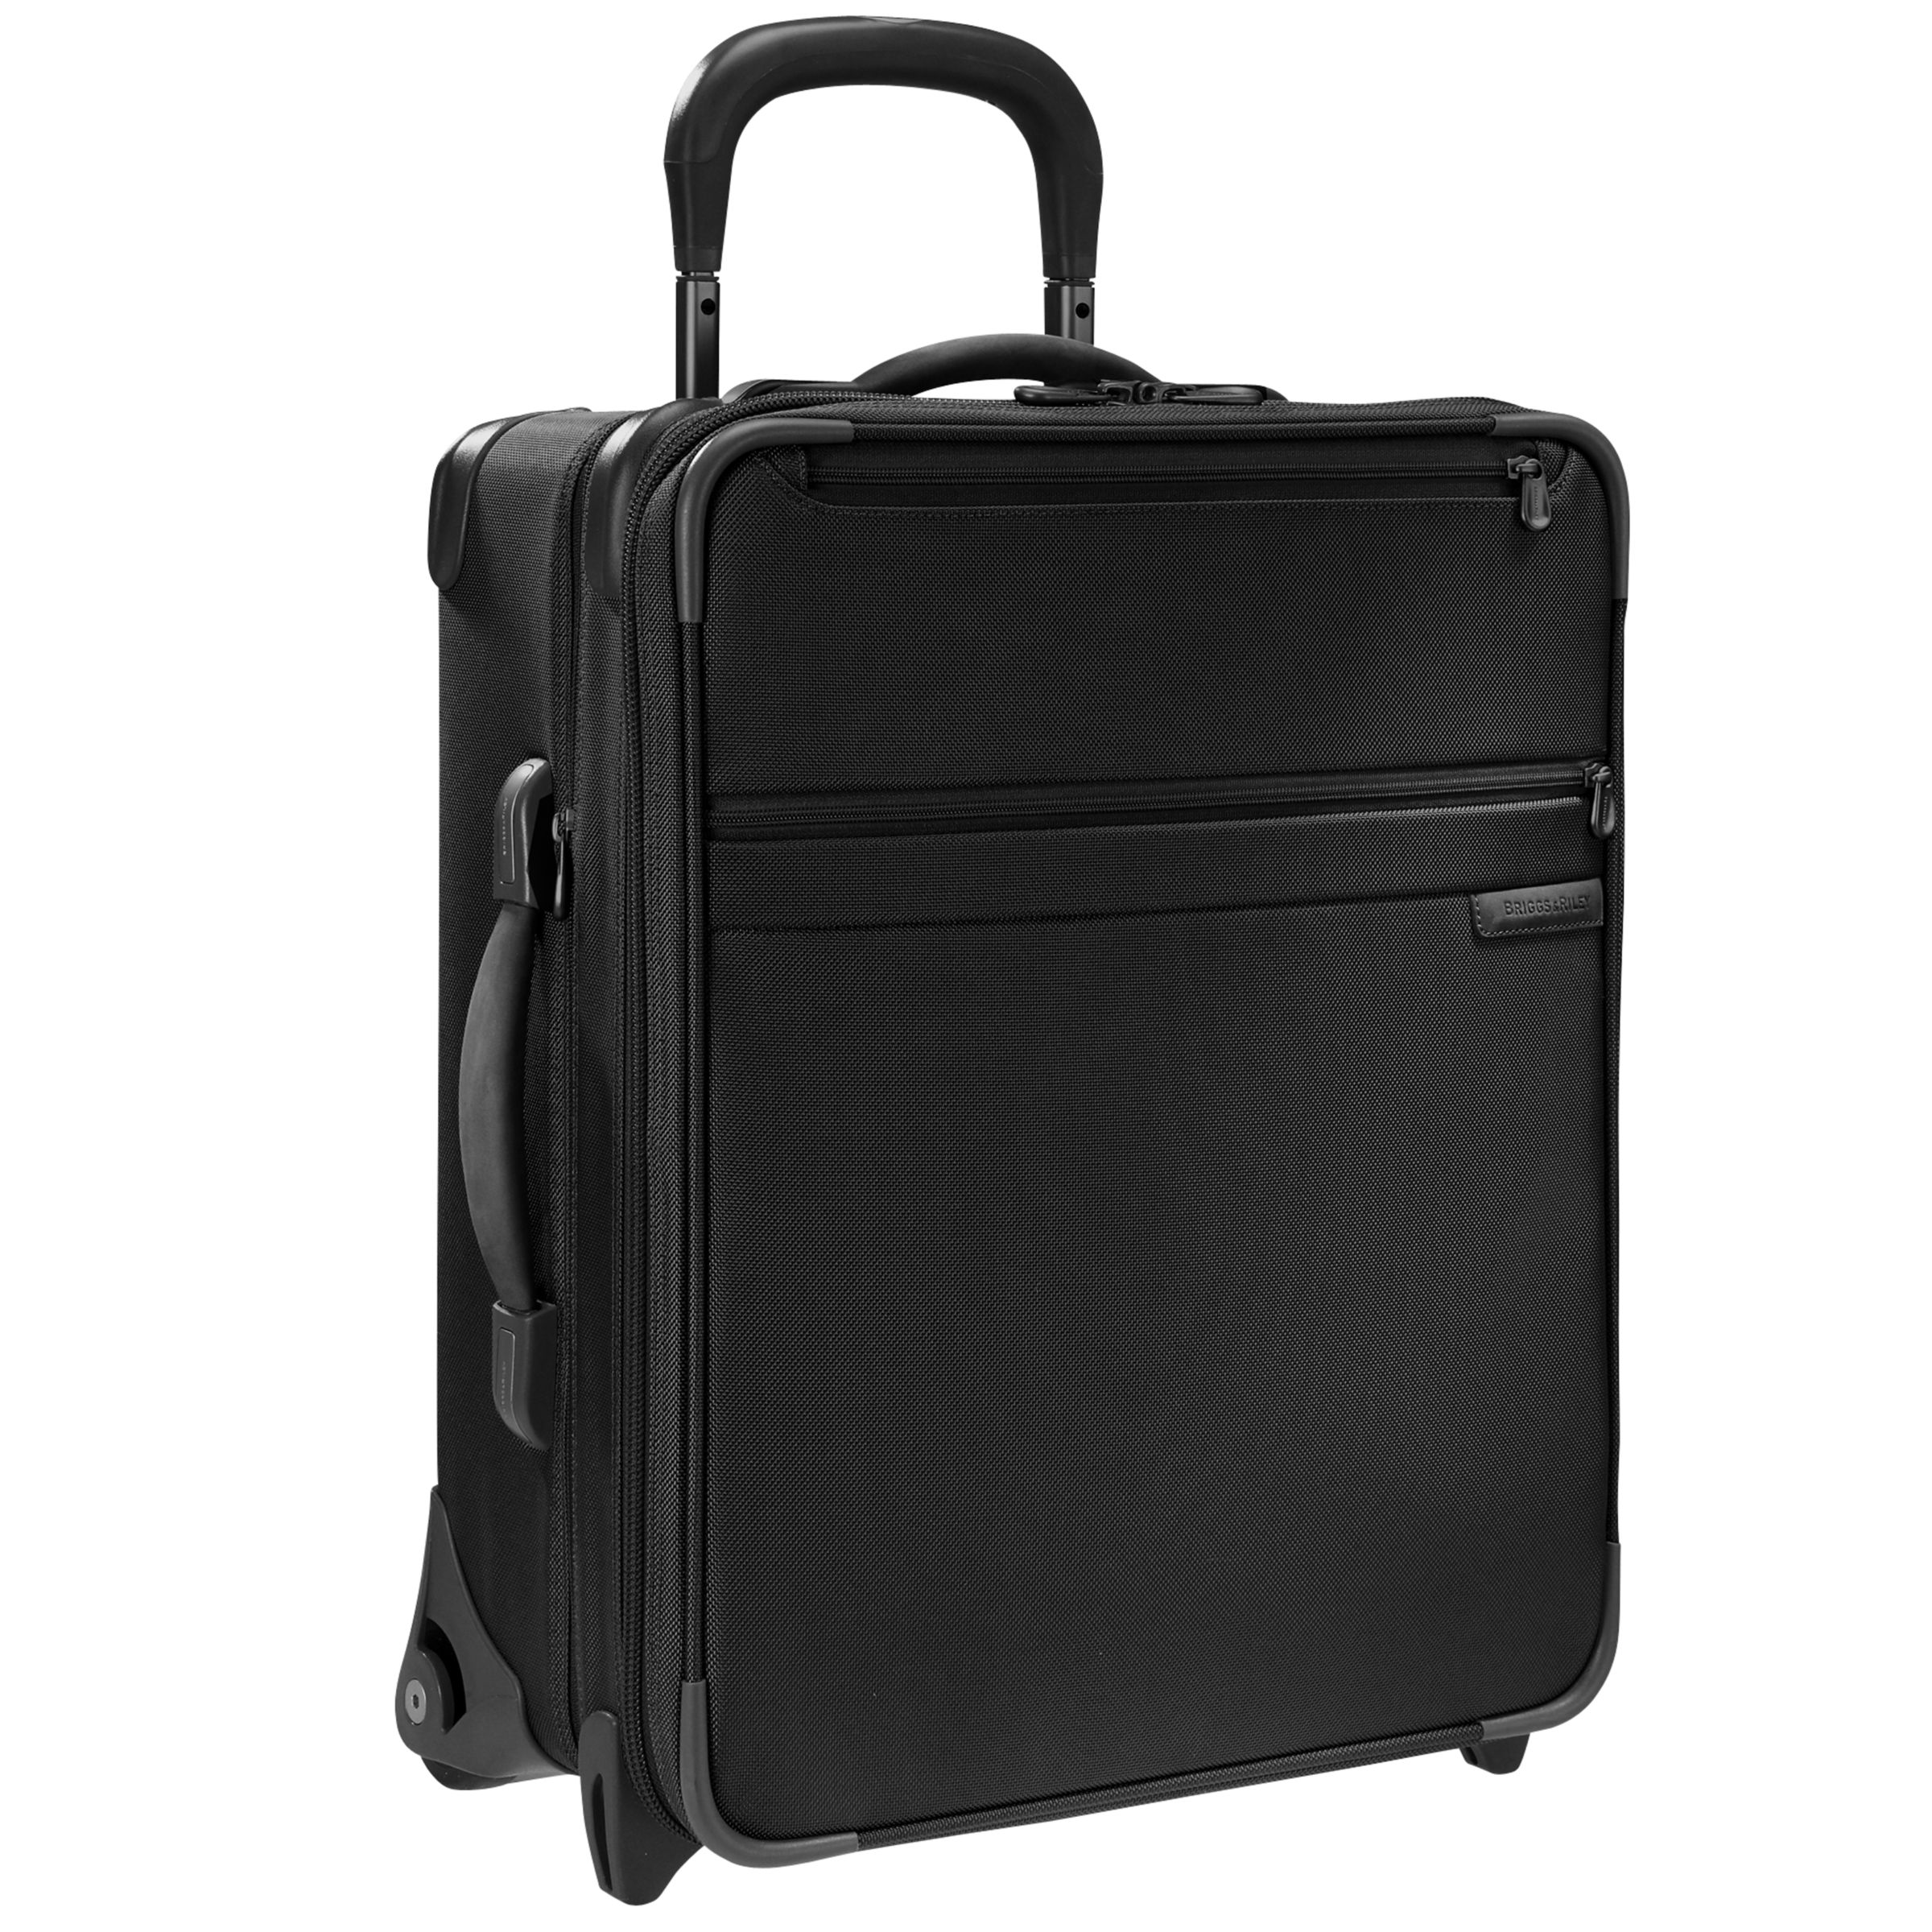 Briggs & Riley 20” Wide-Body Expandable Upright Cabin Bag, Black at John Lewis